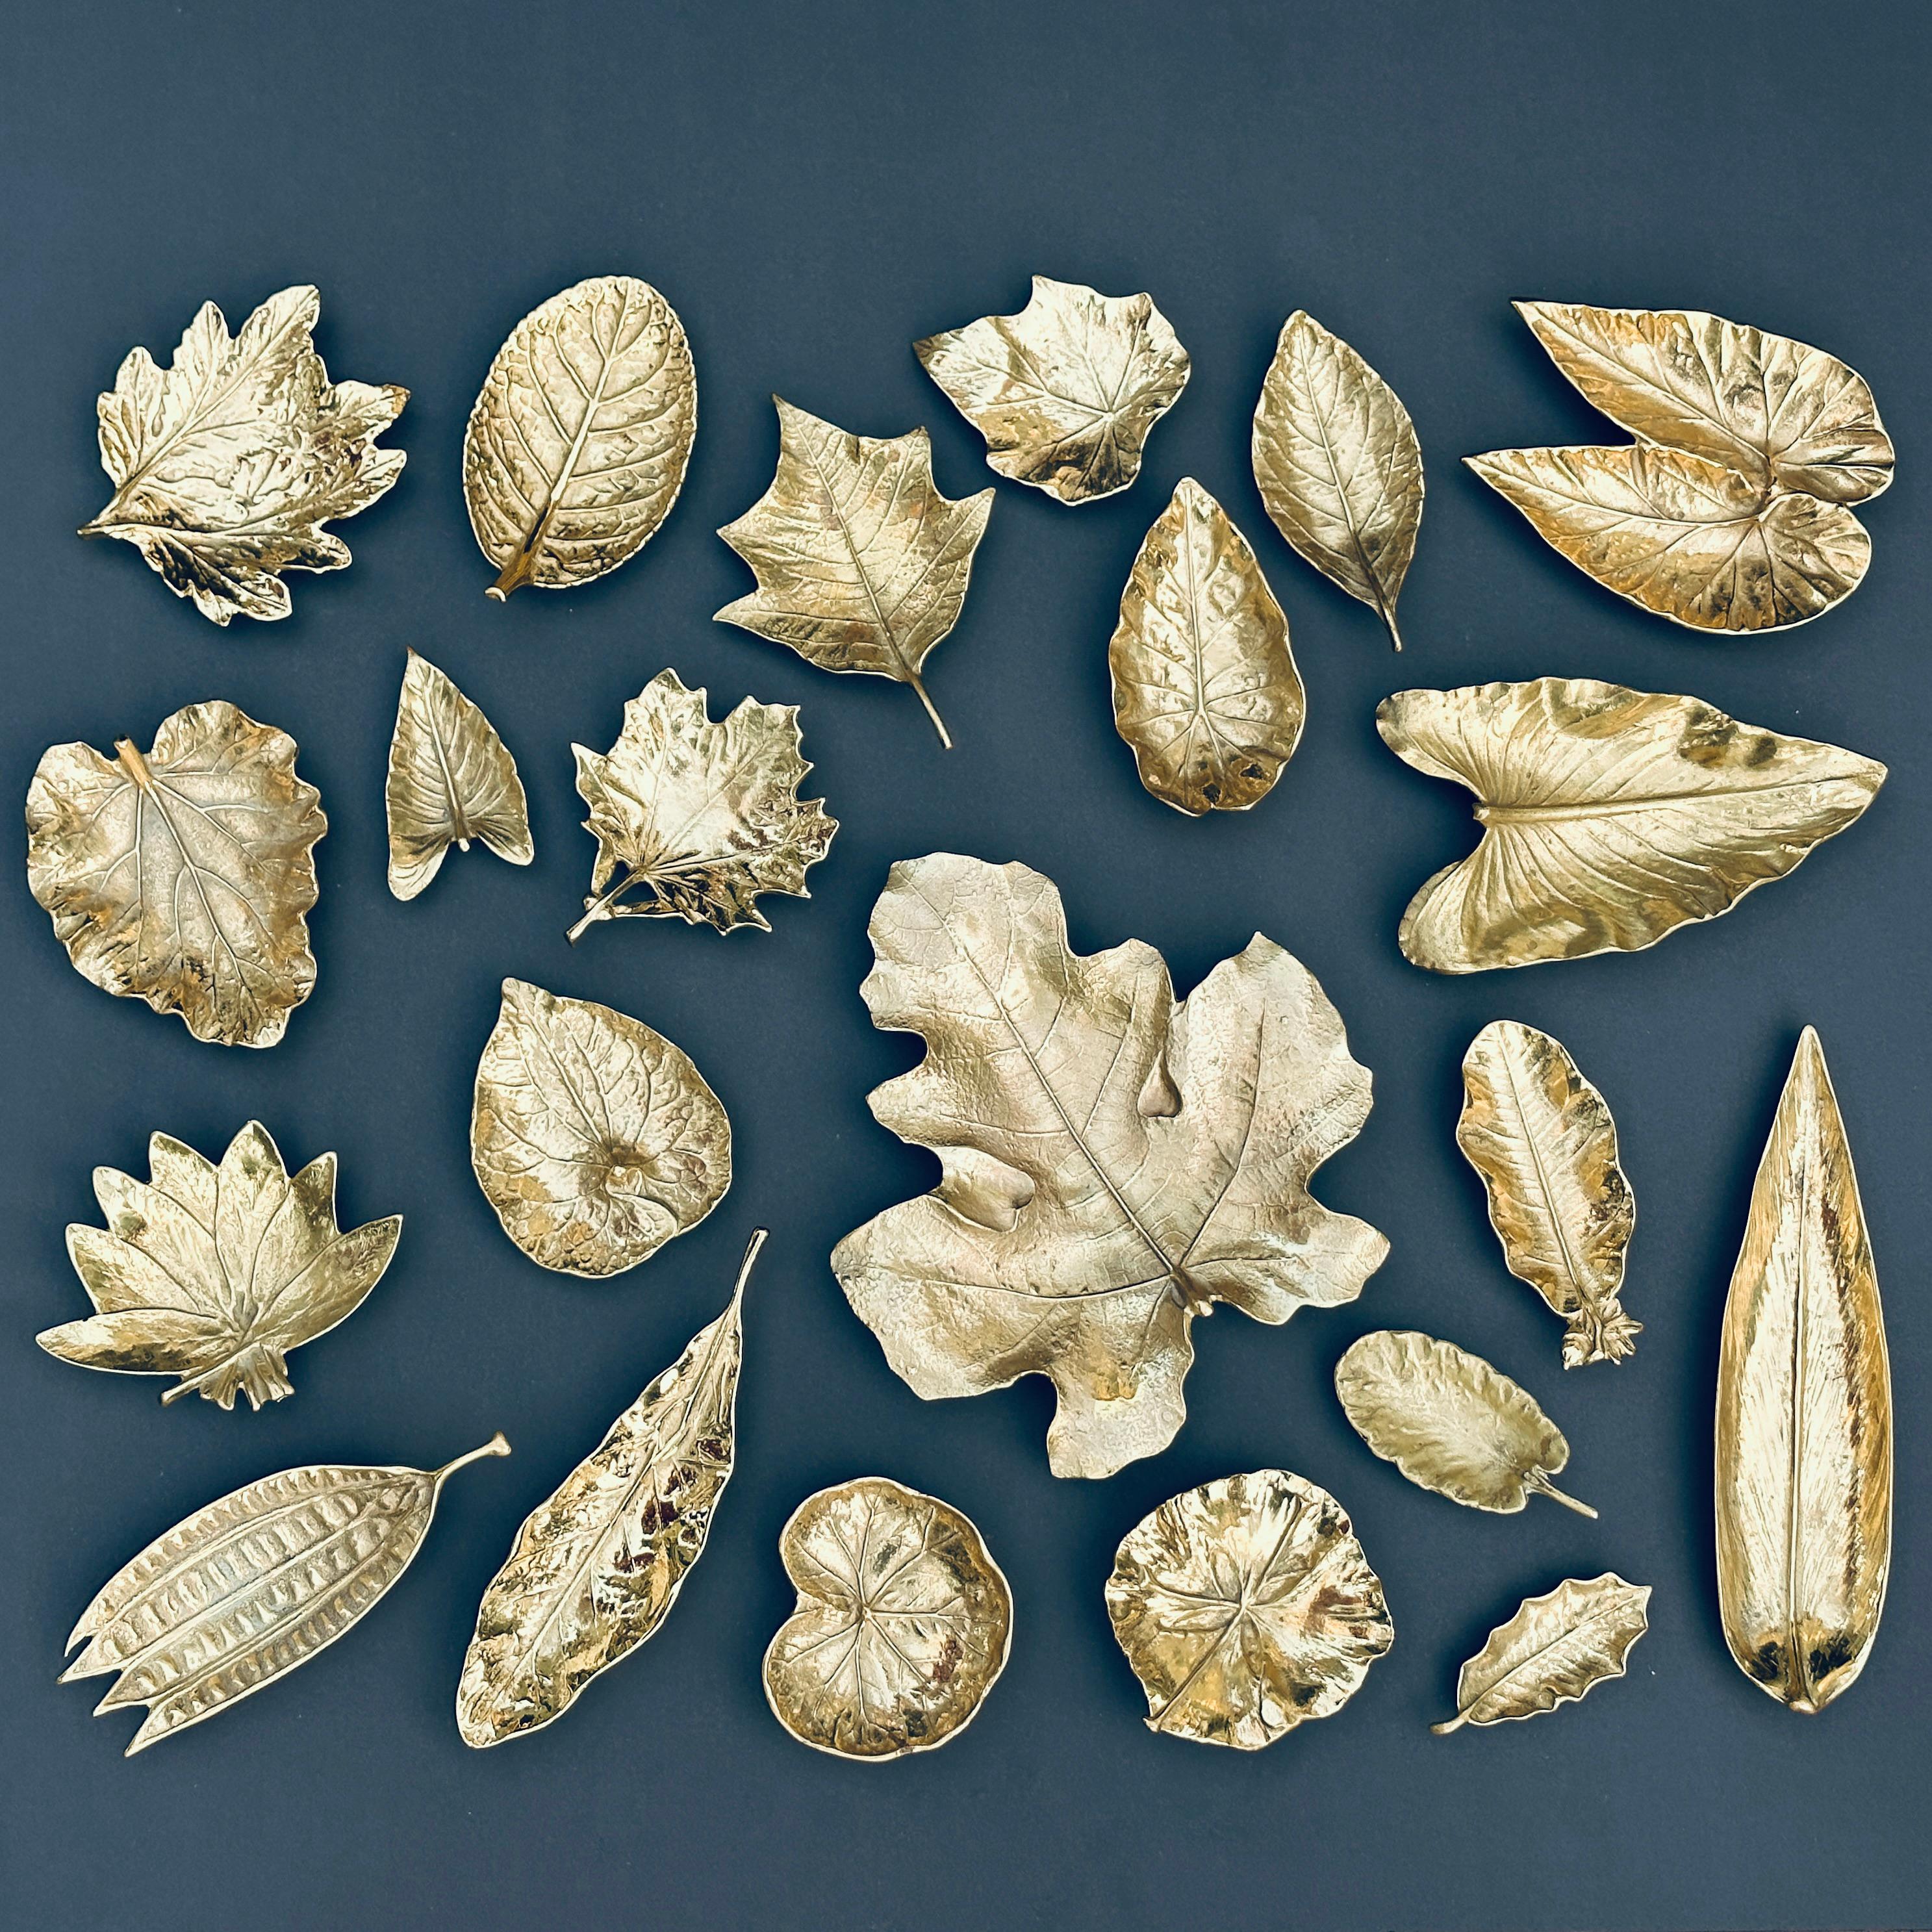 Beautiful collection of 22 solid brass leaf sculptures by Virginia Metalcrafters. Each piece signed on the backside with the VMC logo and embossed with item number and type of leaf. Largest 11